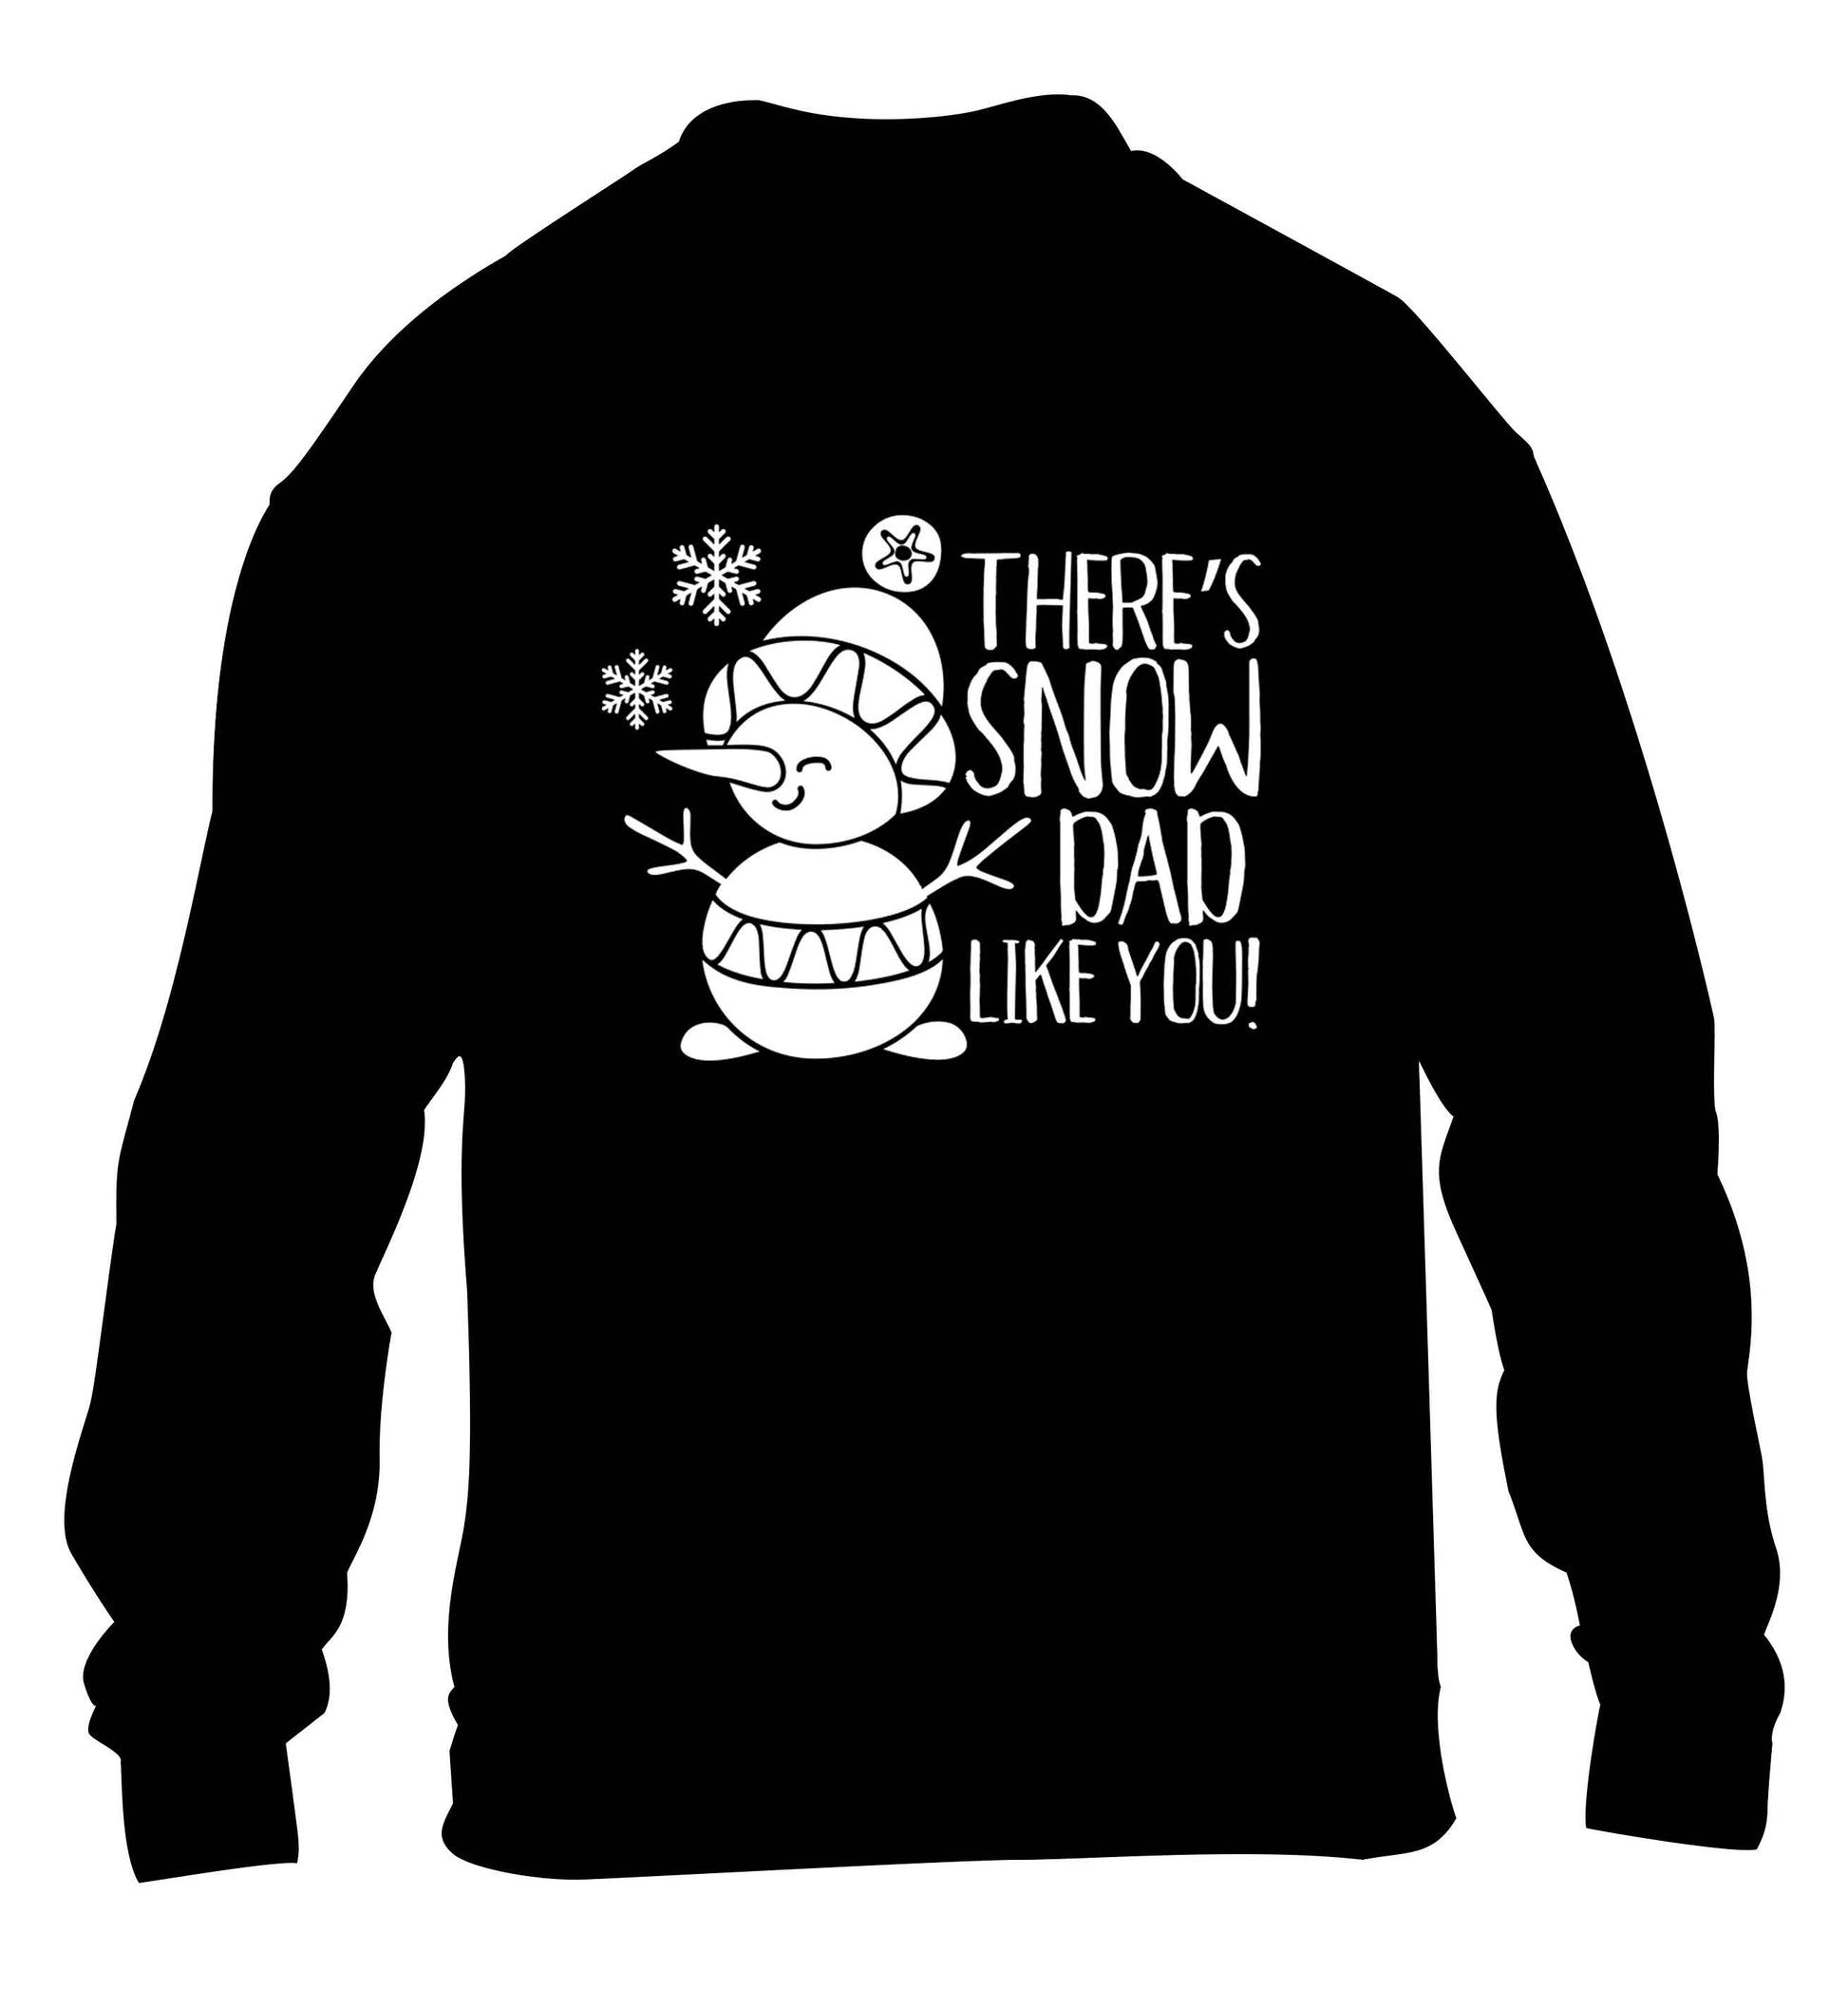 There's snow dad like you children's black sweater 12-13 Years